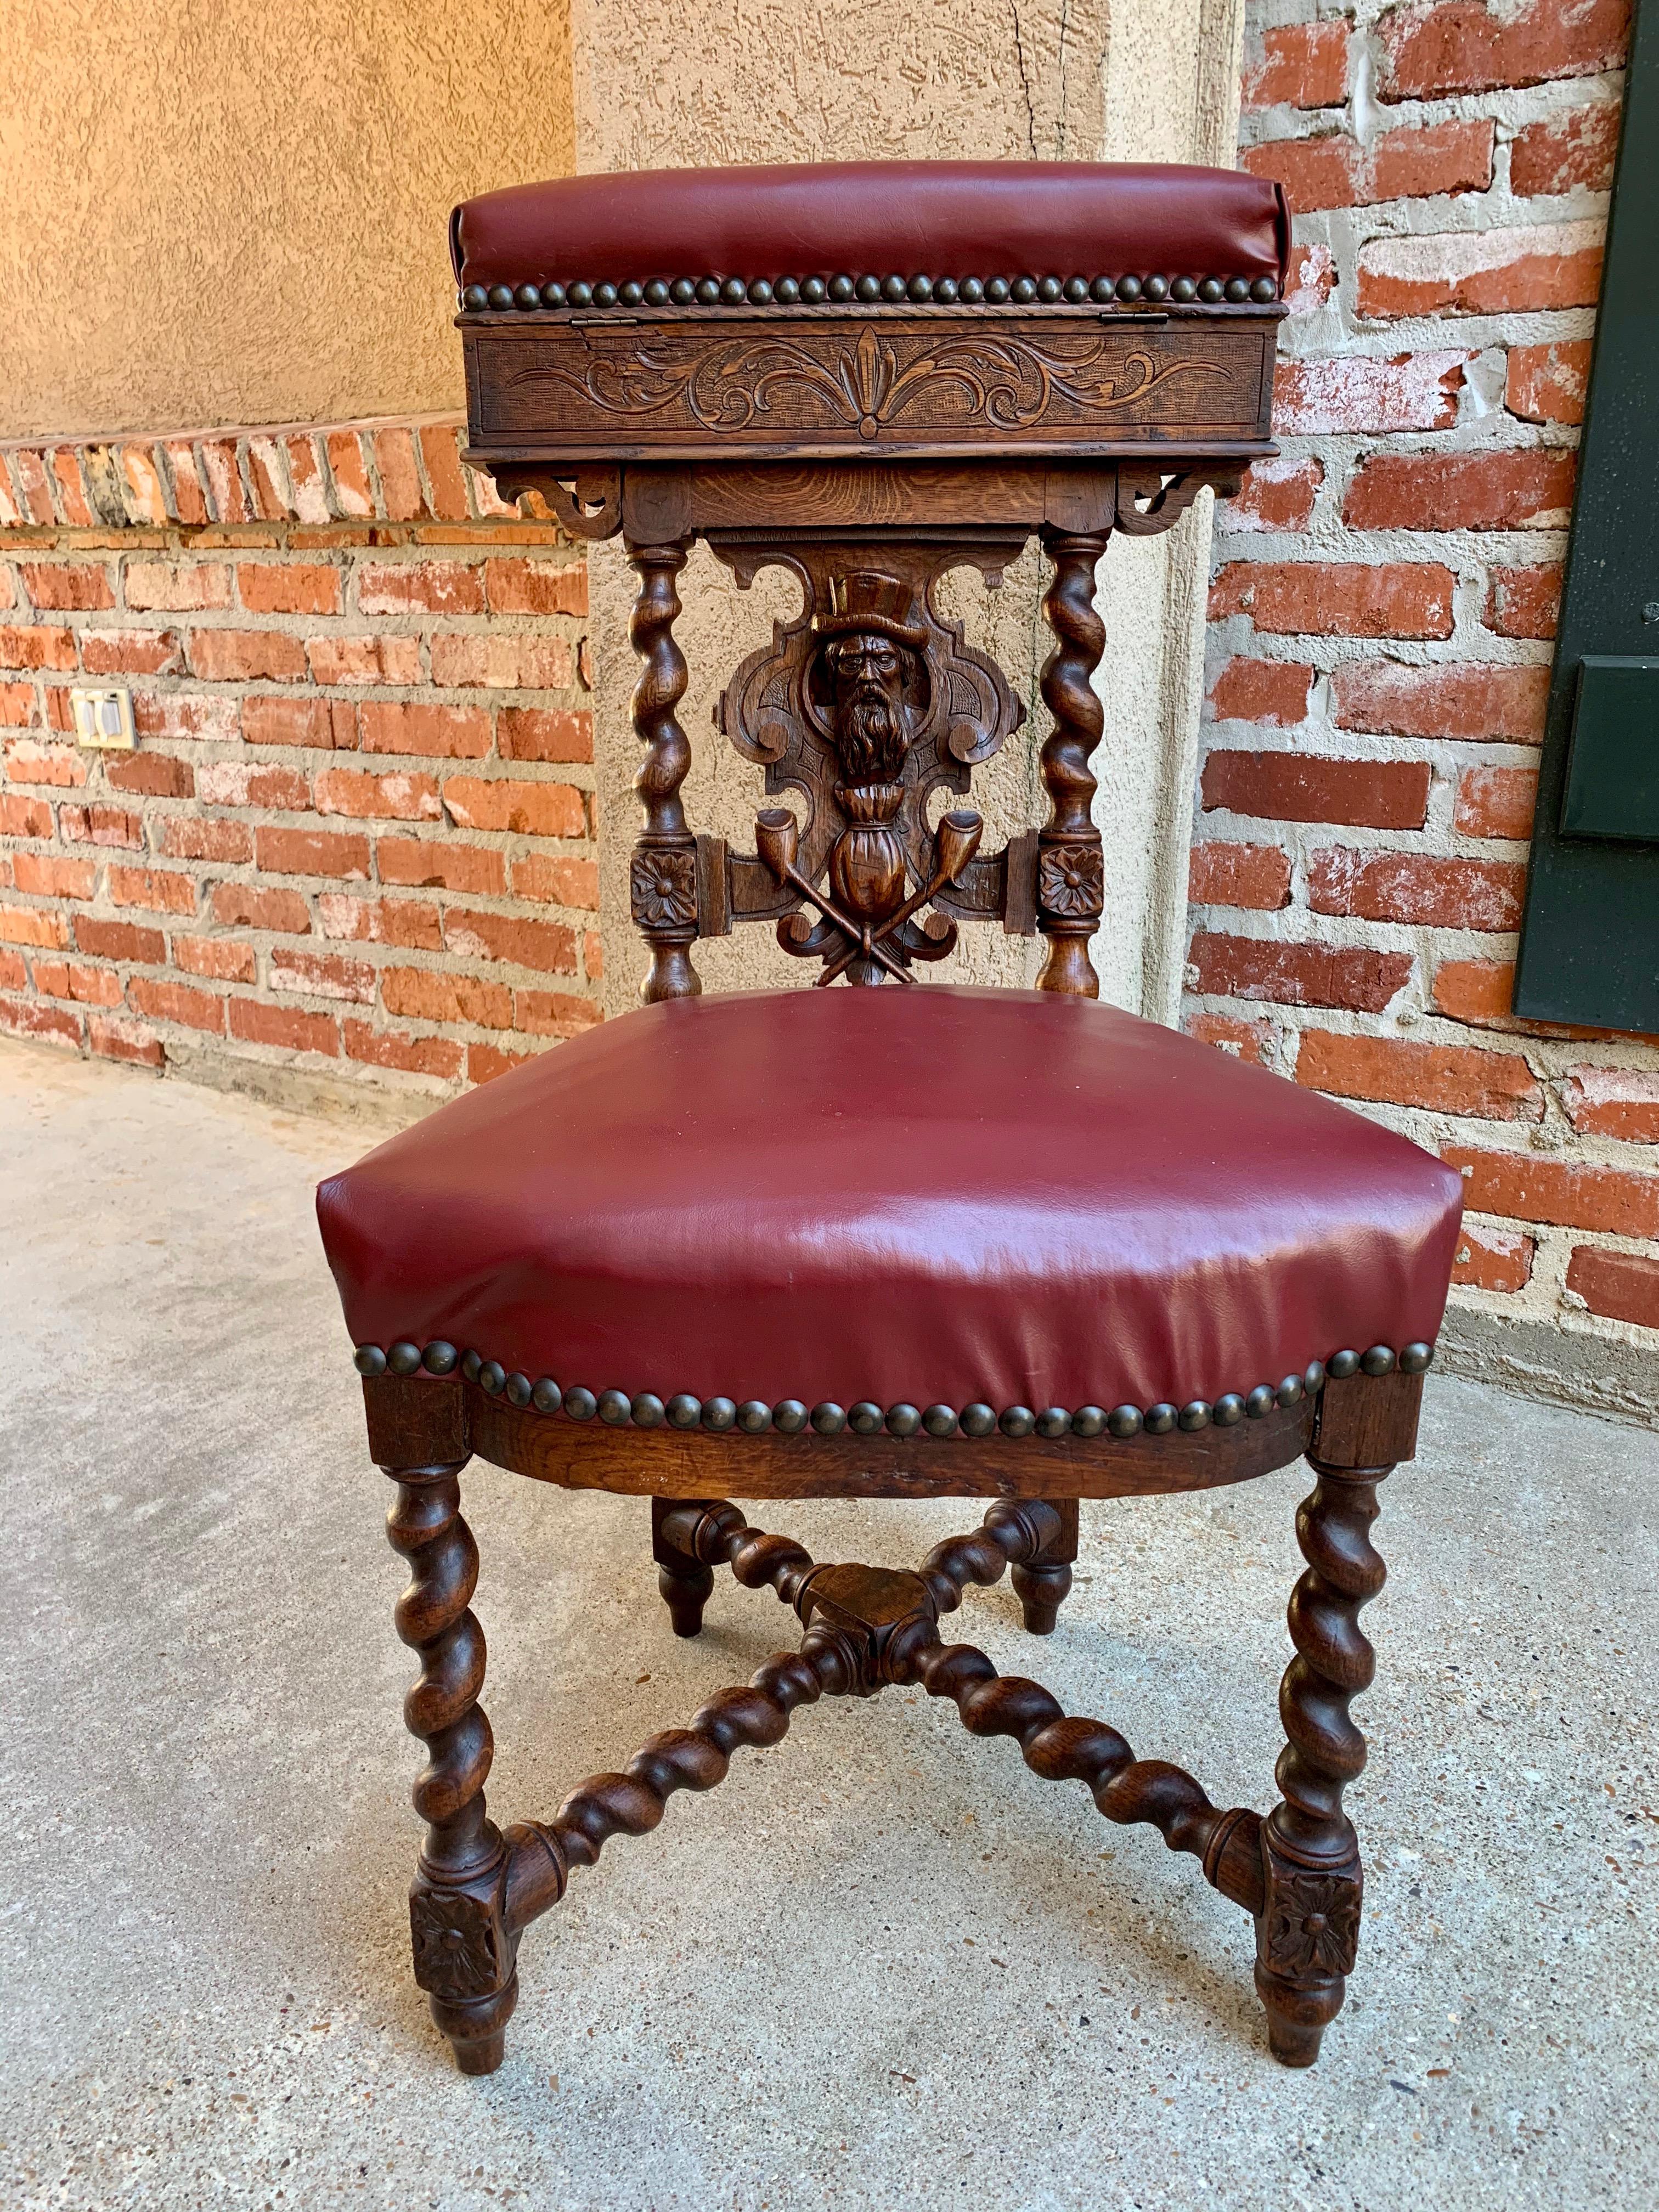 Direct from France, a very unique French antique chair, with outstanding hand carvings, known as a French “smoking chair”, or “Fumeuse”, “chaise de fumeur”.~
~ Aristocrats had these specialty chairs created for their use when smoking cigars, pipes